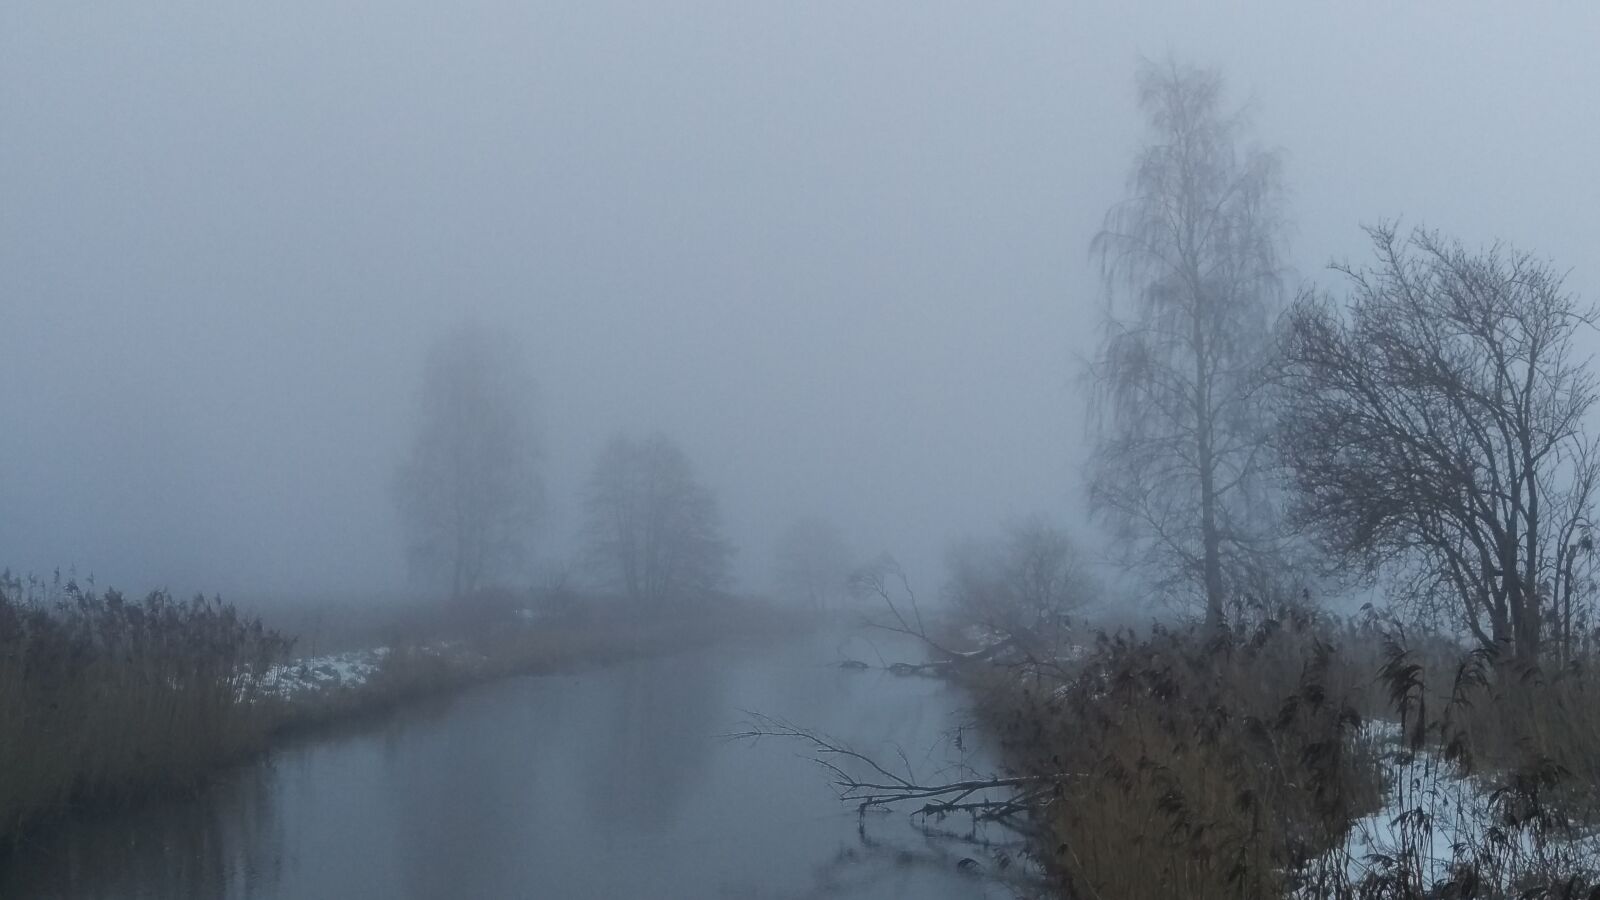 HTC ONE M9 sample photo. River, the fog, landscape photography